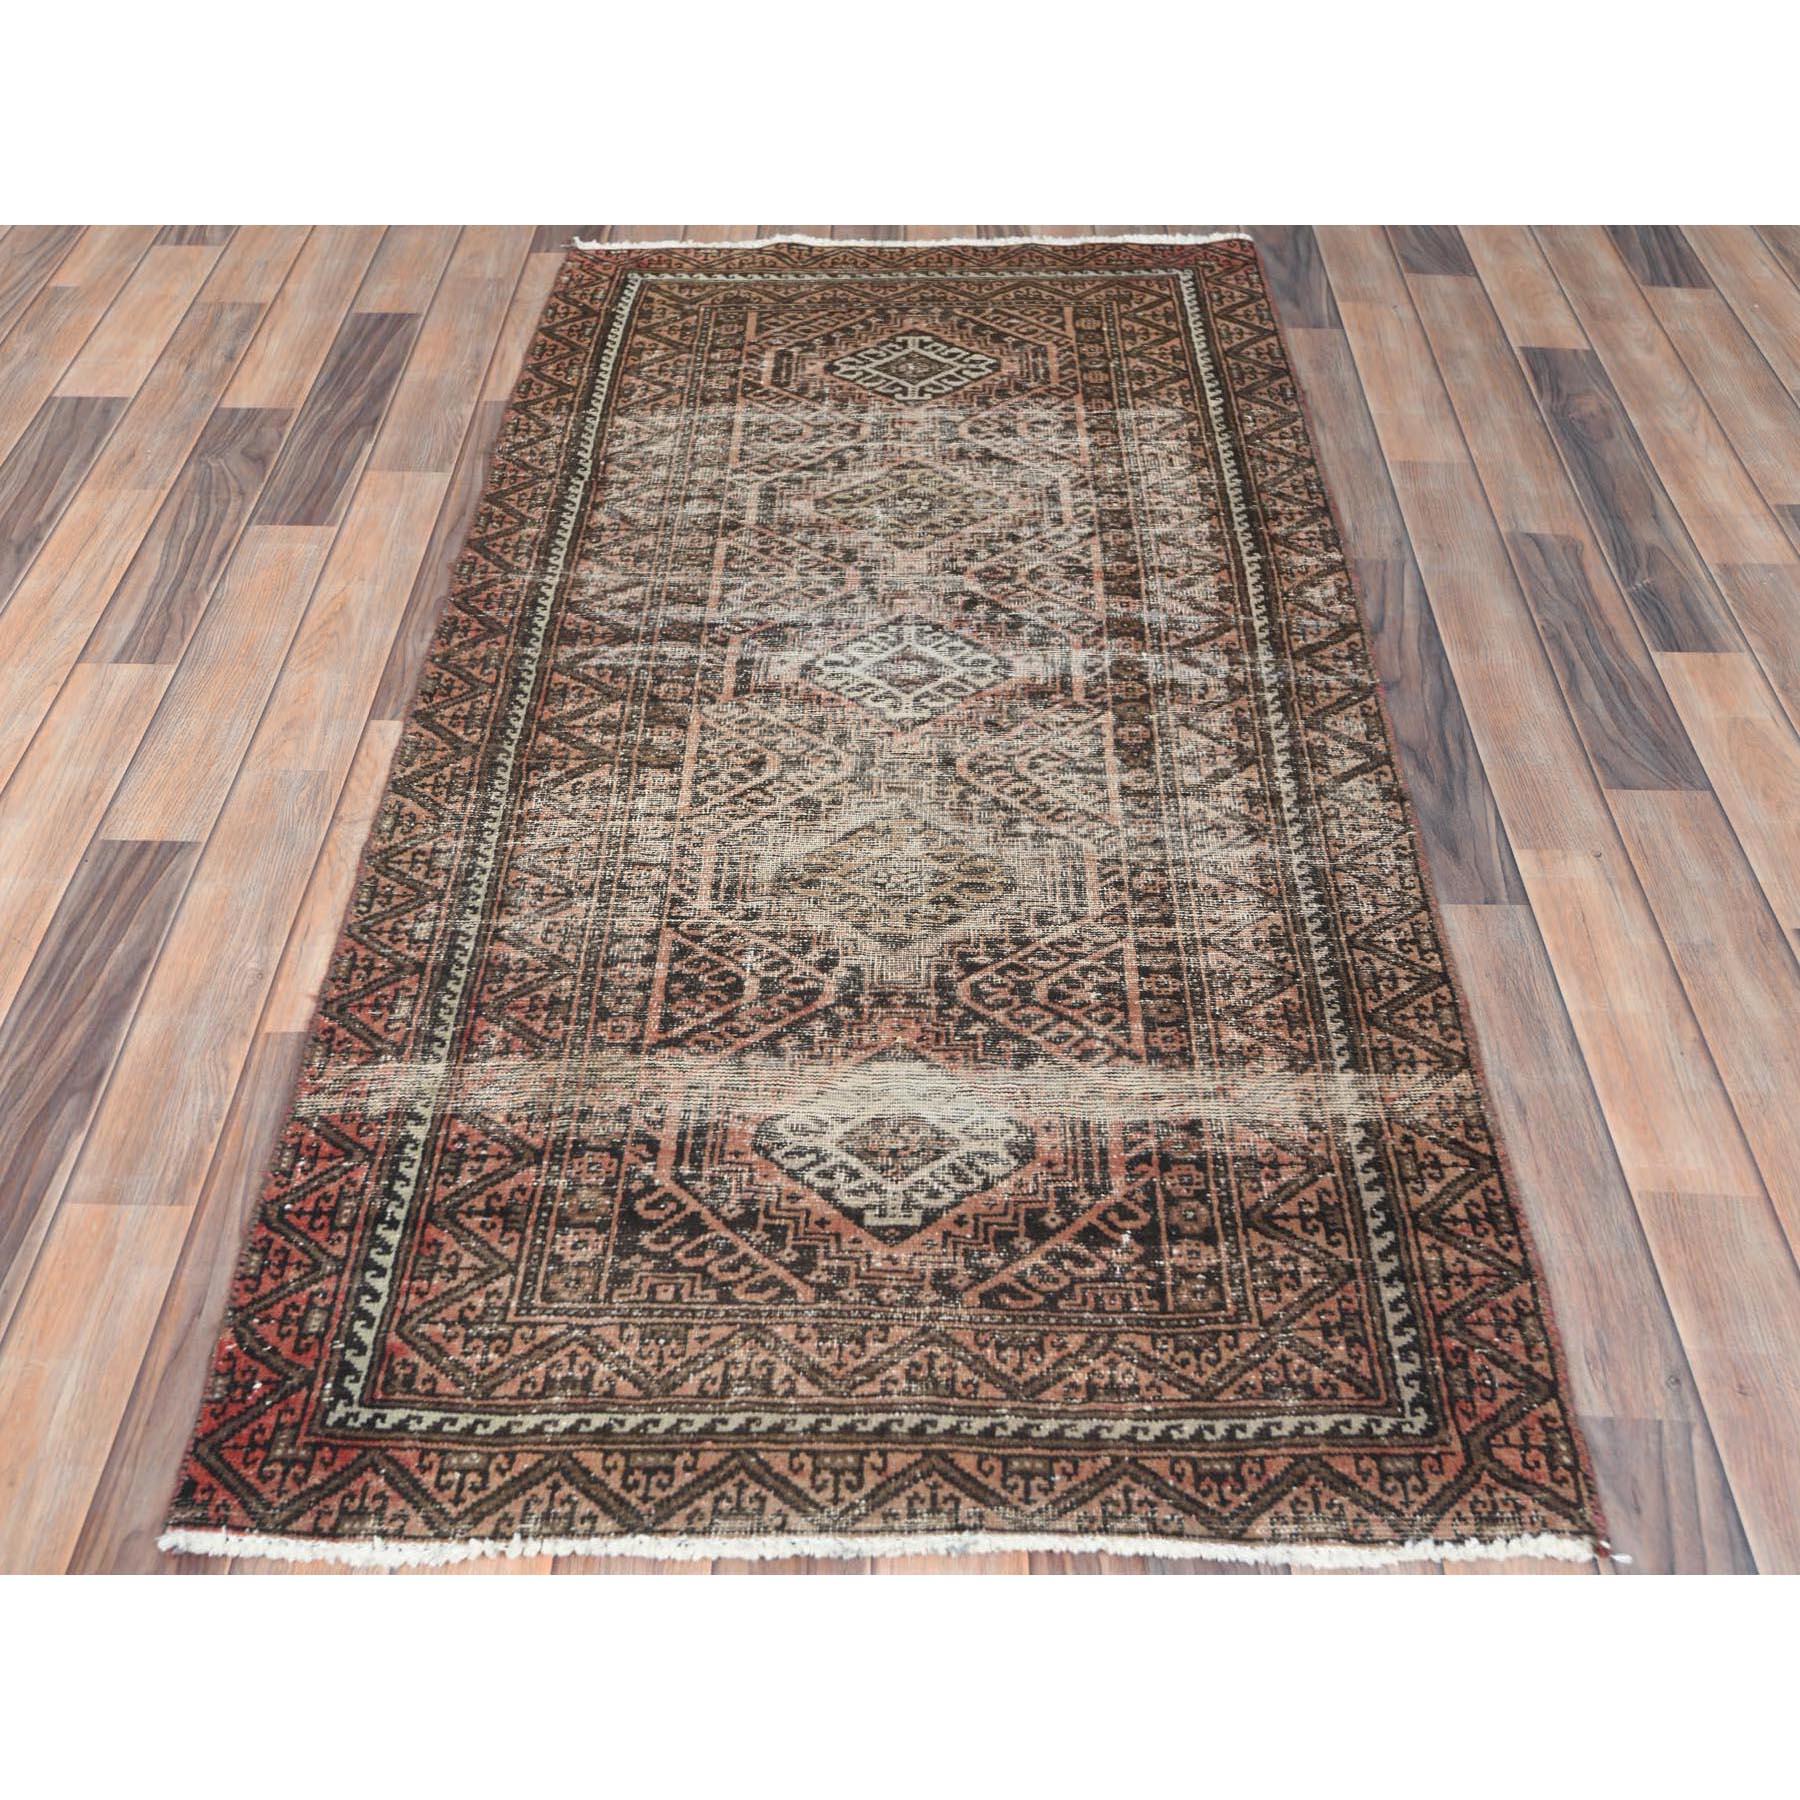 This fabulous Hand-Knotted carpet has been created and designed for extra strength and durability. This rug has been handcrafted for weeks in the traditional method that is used to make
Exact rug size in feet and inches : 3'0